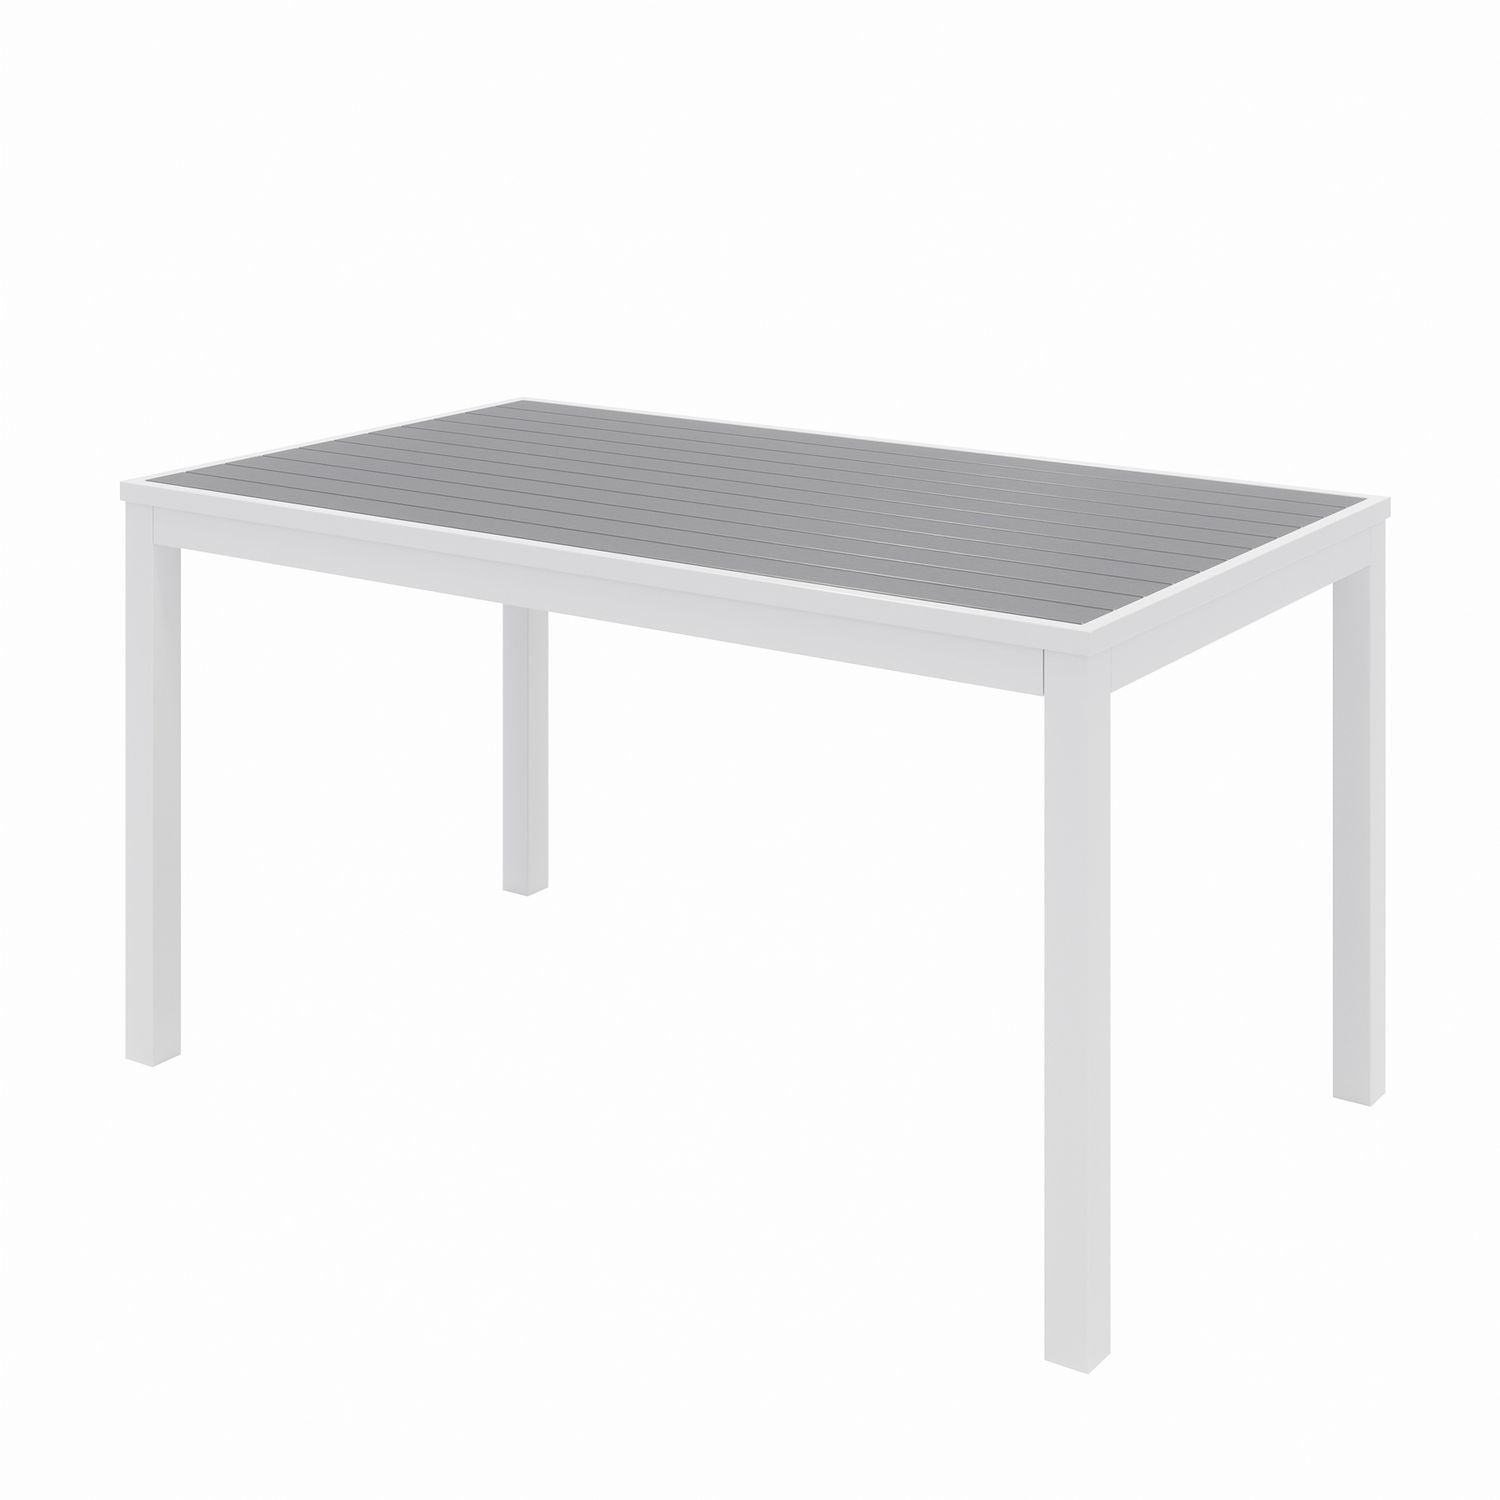 eveleen-outdoor-patio-table-with-six-gray-powder-coated-polymer-chairs-32-x-55-x-29-gray-ships-in-4-6-business-days_kfi840031918536 - 2